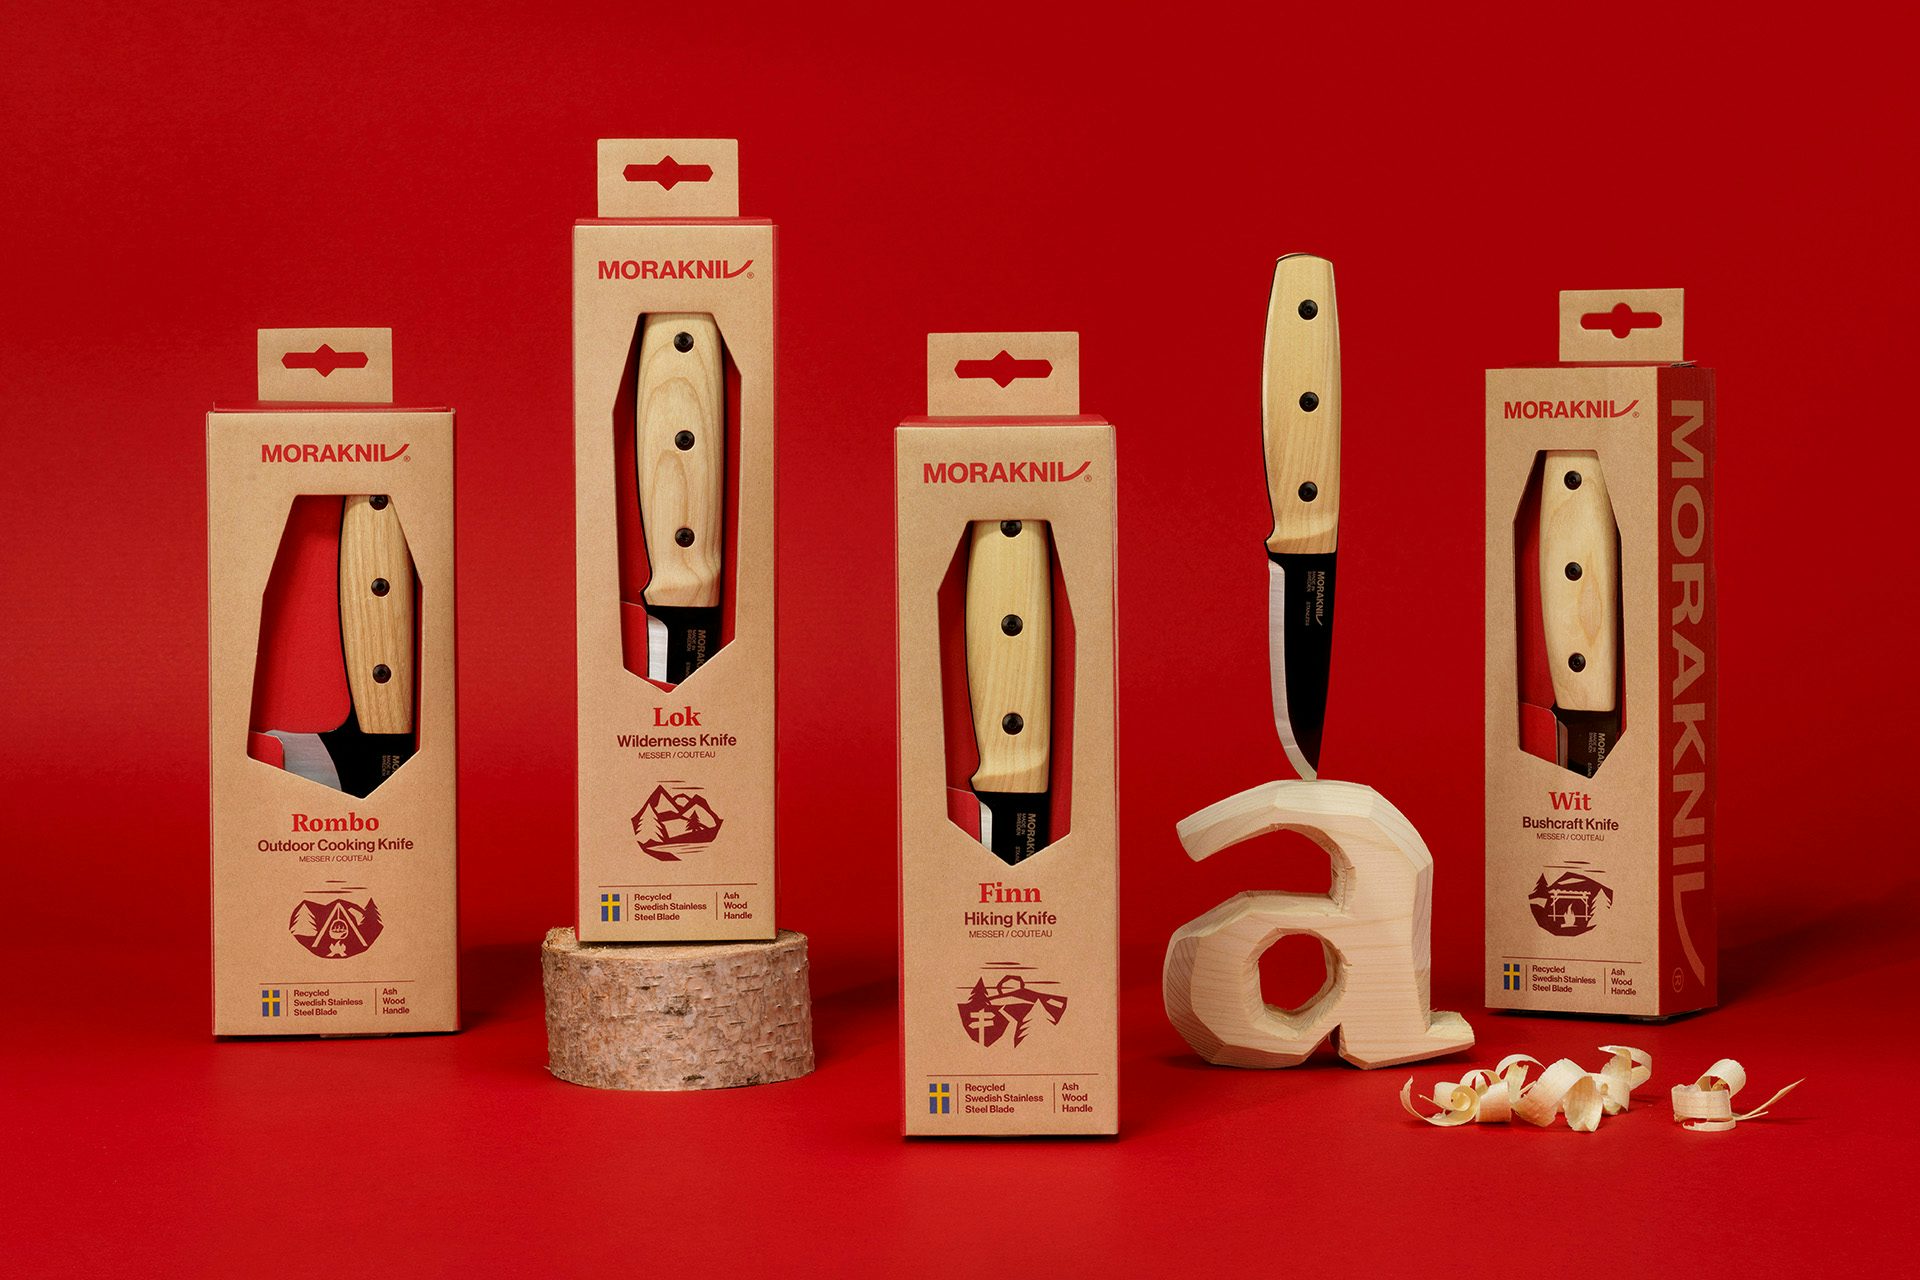 Image shows the Morakniv packaging design shown on five products, with the knife shown within a cutout on the packaging